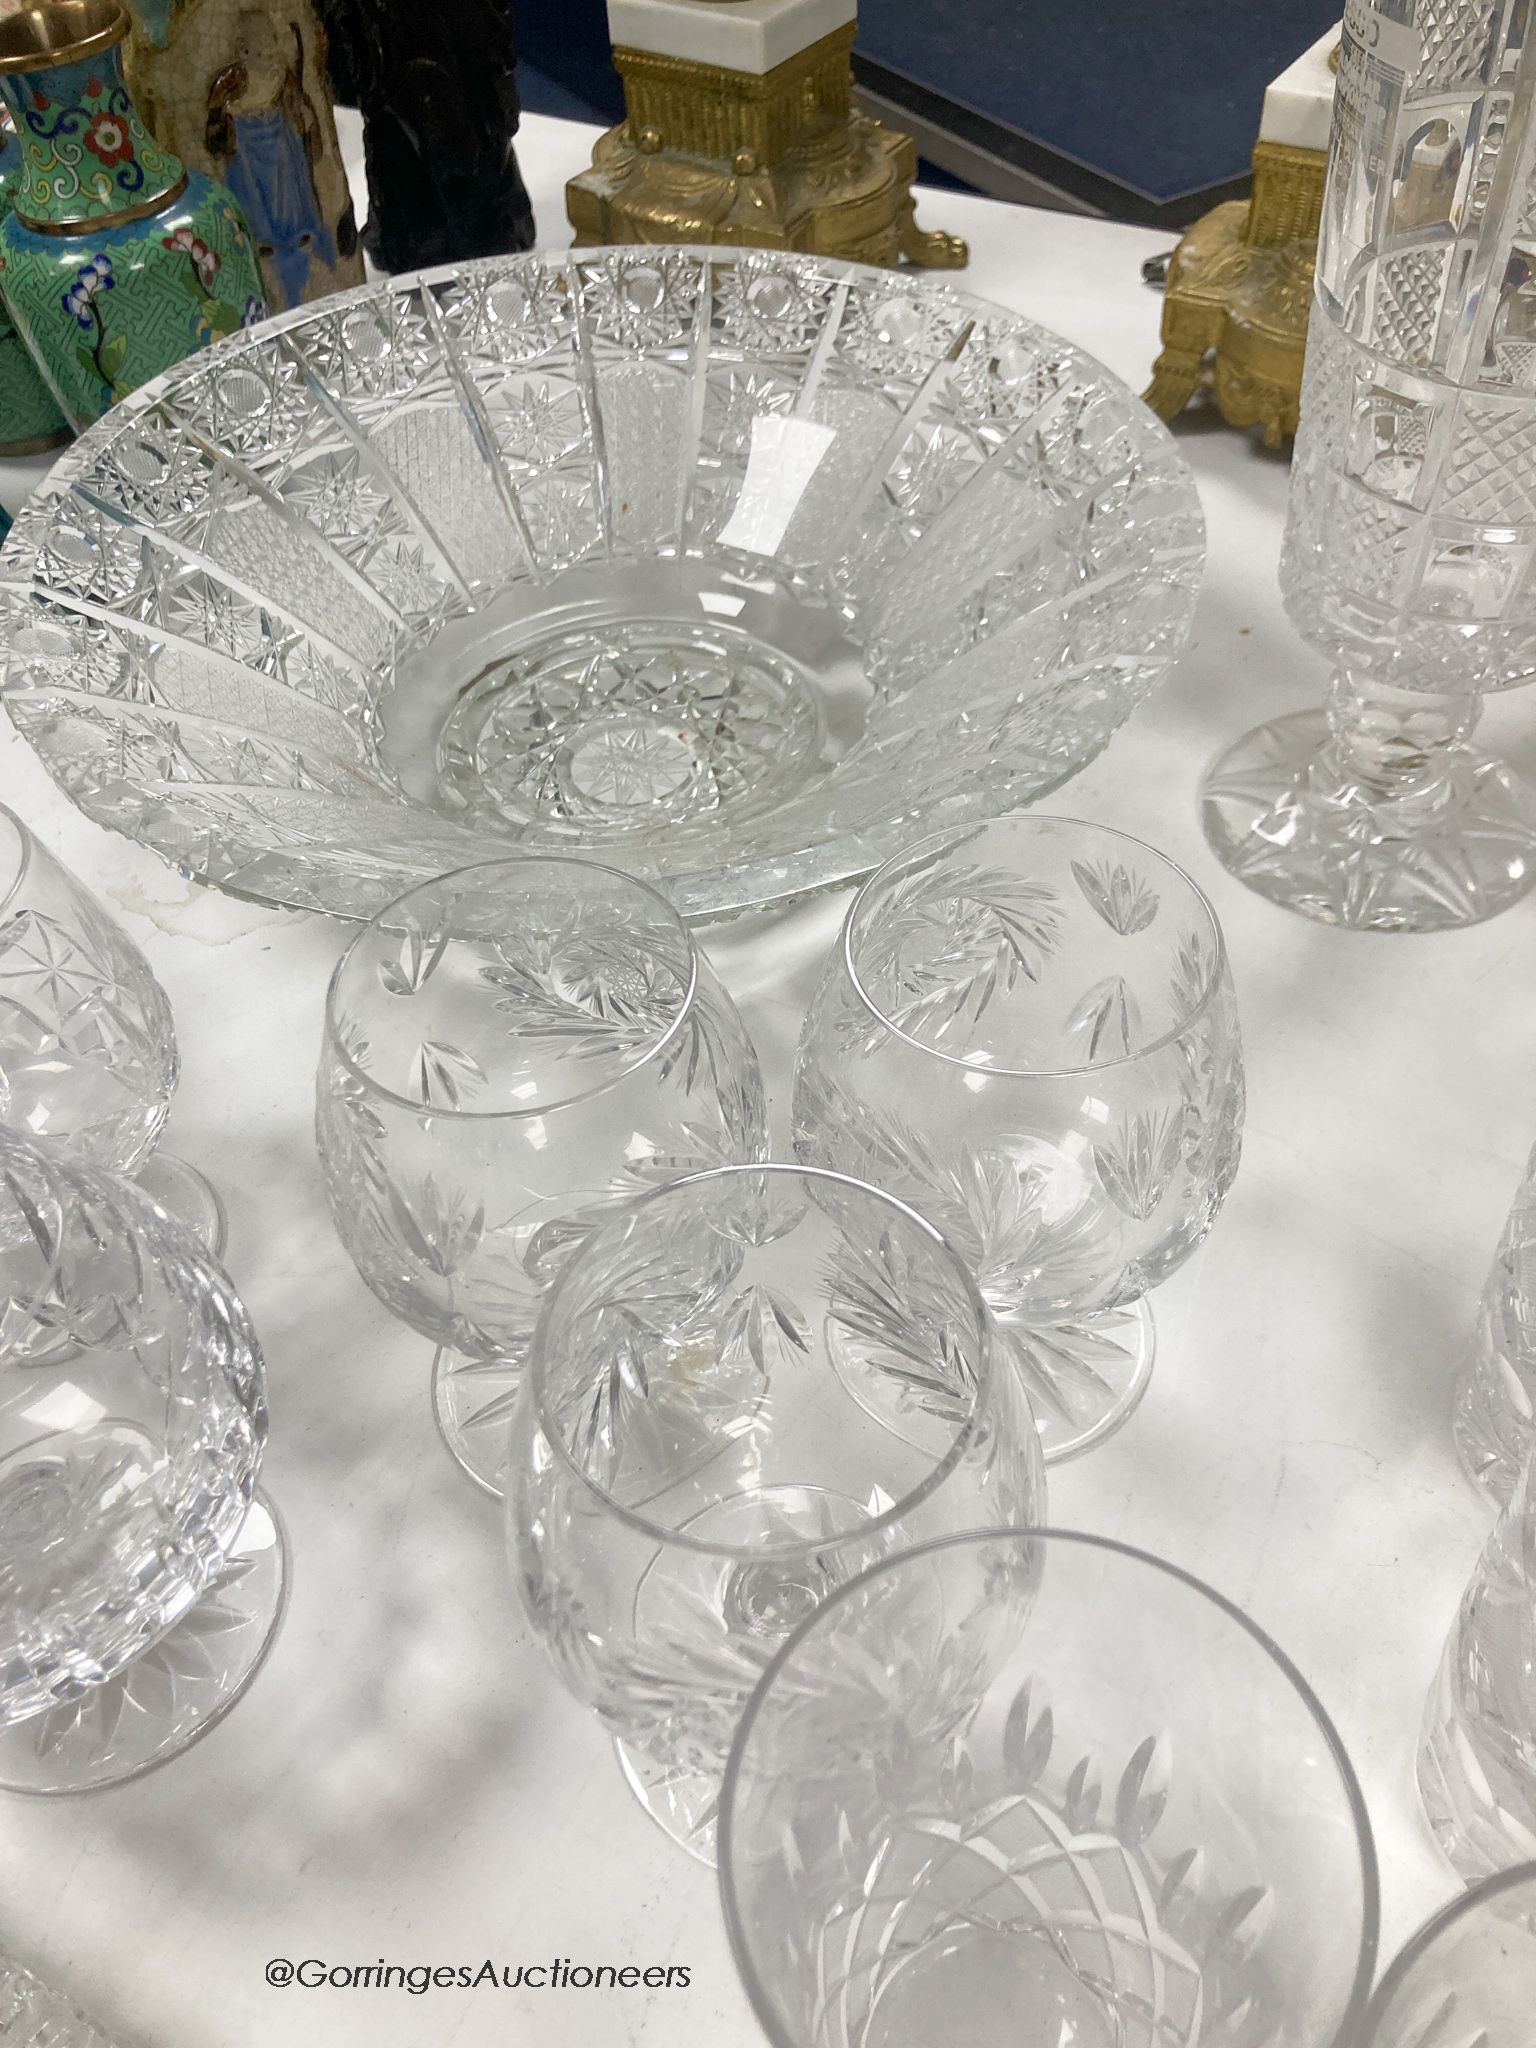 A suite of Hungarian crystal glassware